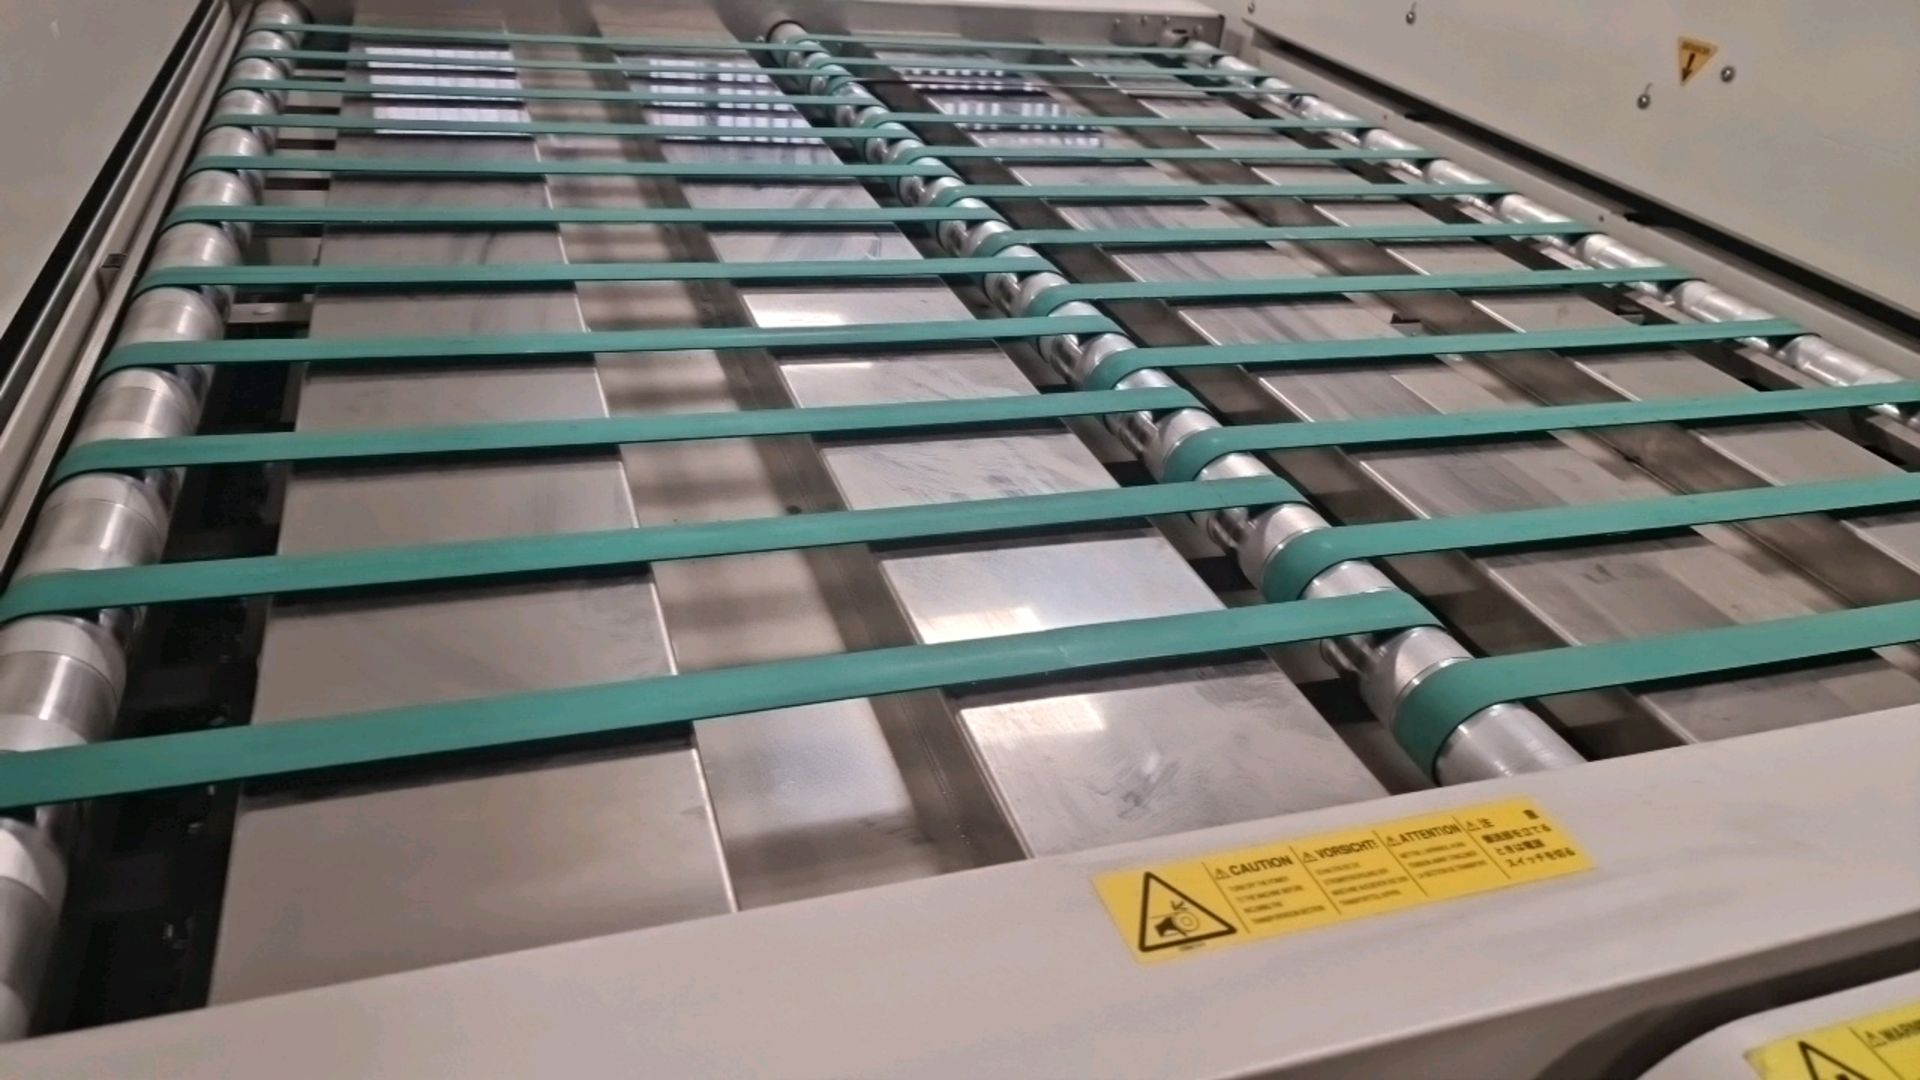 2005 Screen Platerite AT-T8001 Conveyor - Image 3 of 7